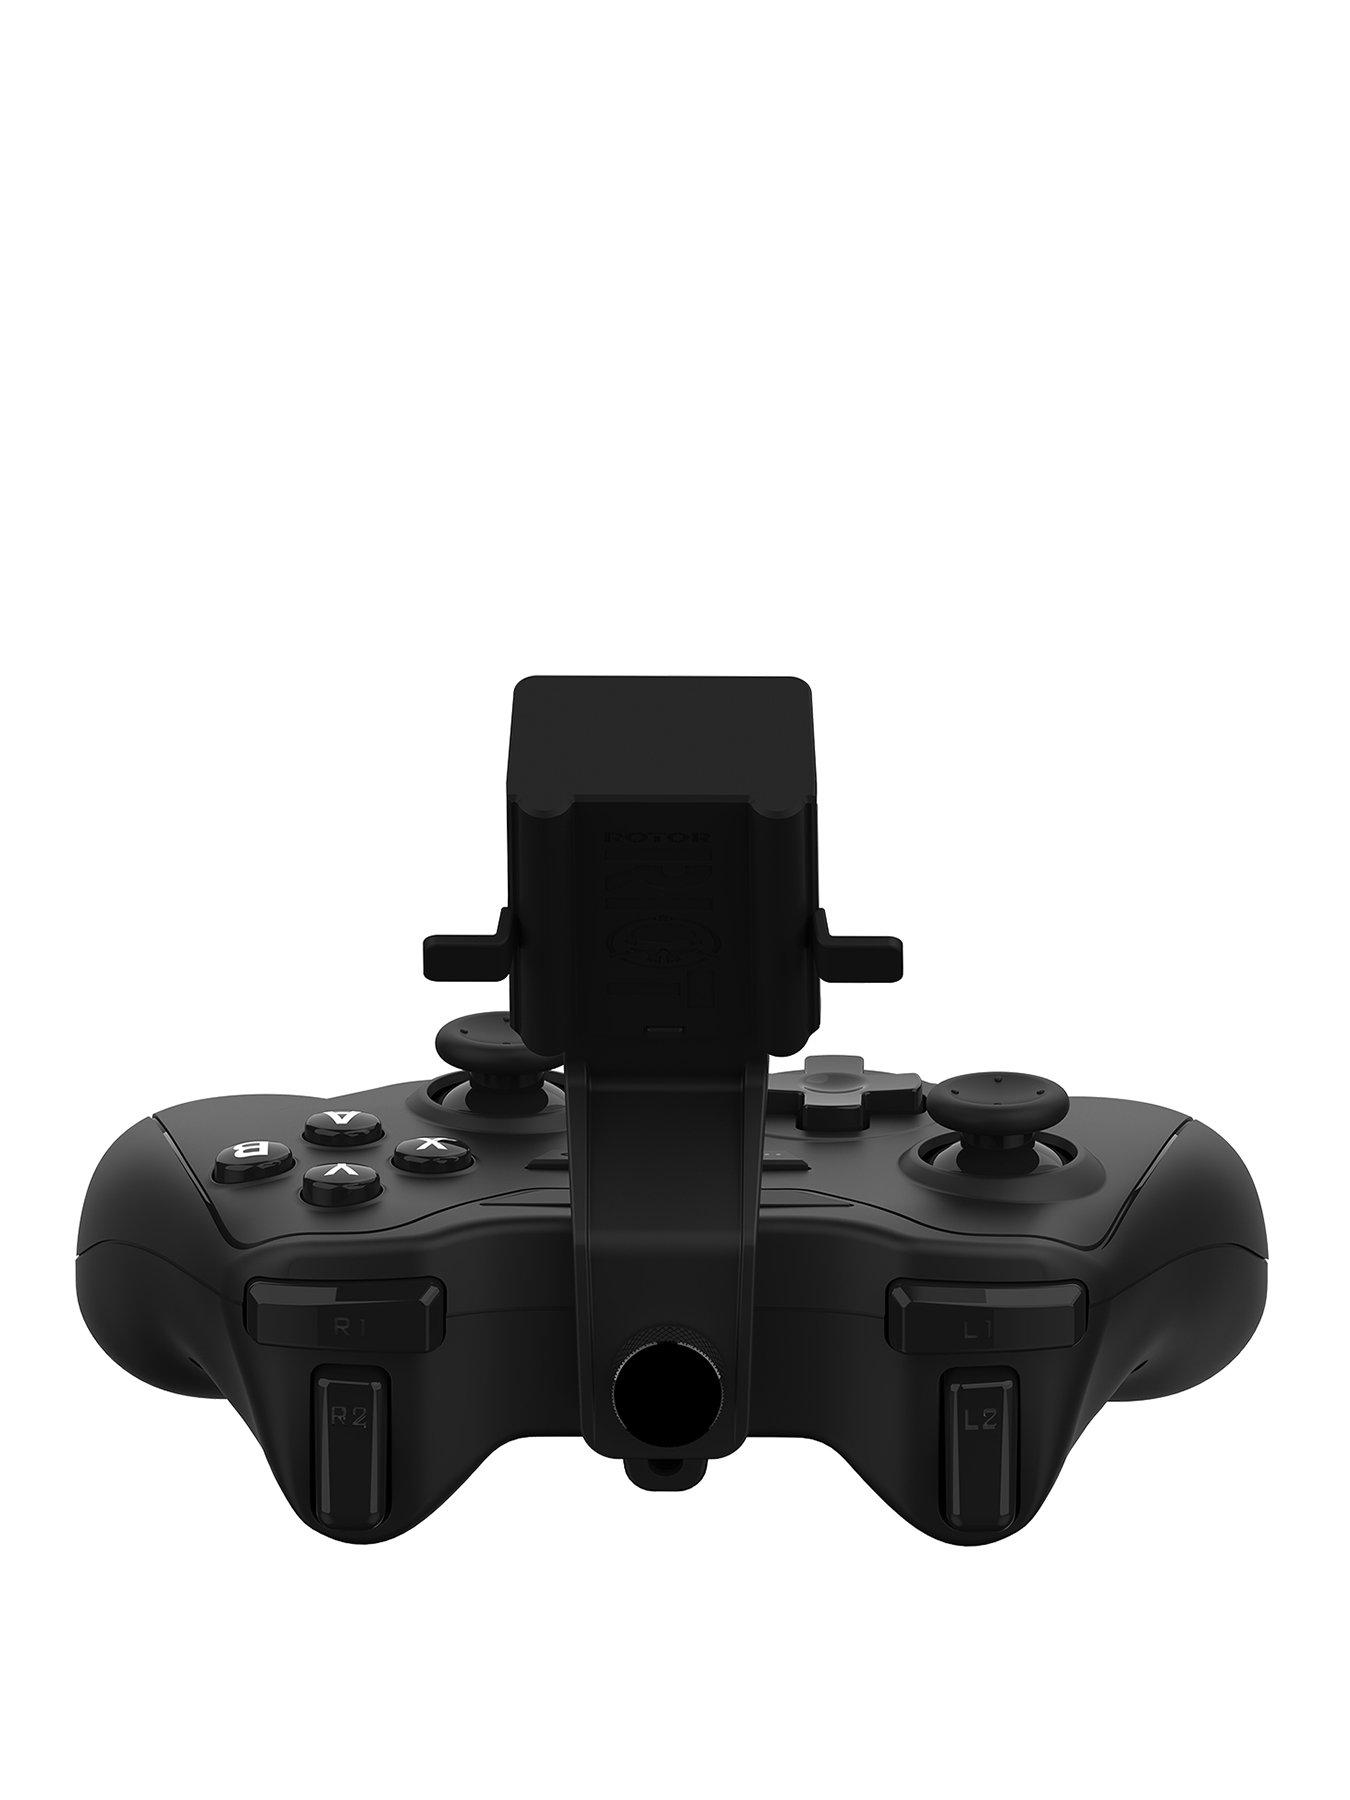 Rotor Riot Mobile Controller for Android